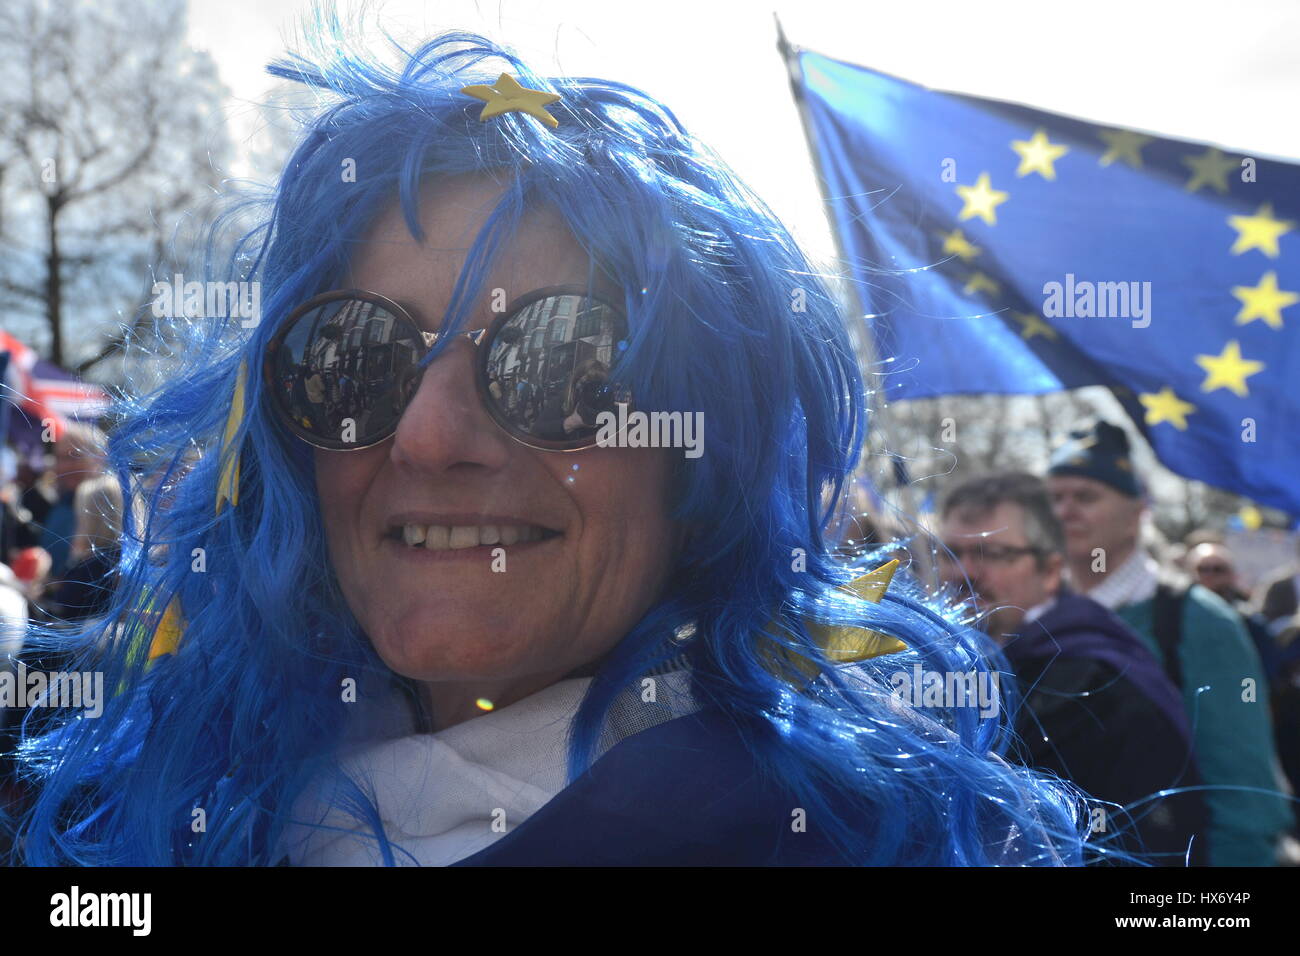 A pro-EU protester taking part in a March for Europe rally against Brexit in central London wears a blue wig with stars symbolising the European Union. Stock Photo